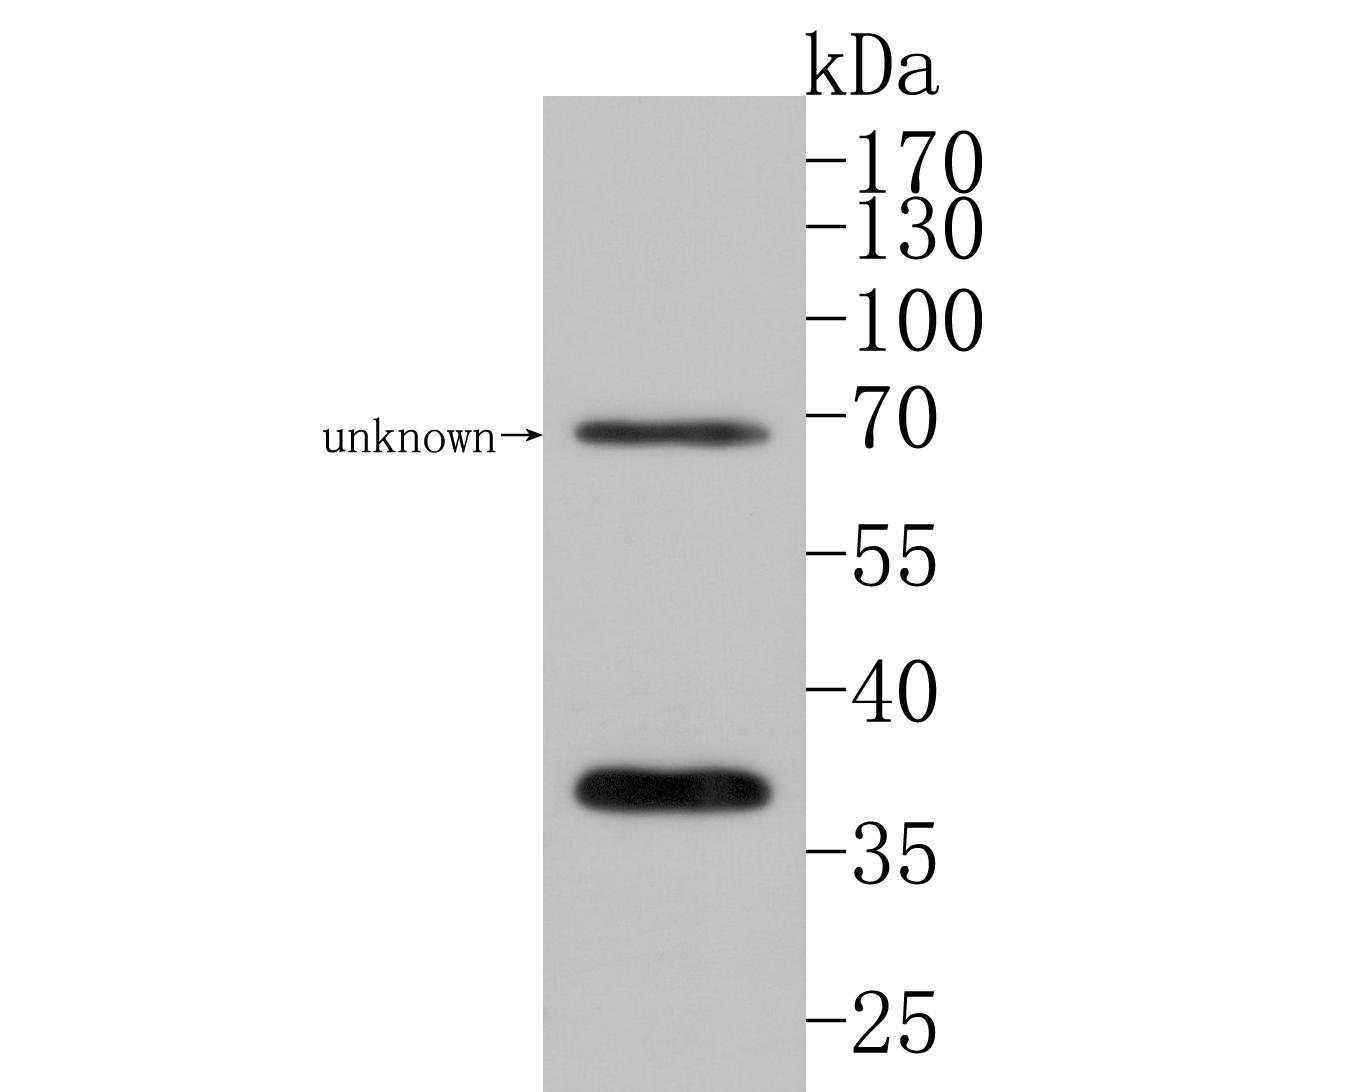 Western blot analysis of GNB4 on mouse brain lysates. Proteins were transferred to a PVDF membrane and blocked with 5% BSA in PBS for 1 hour at room temperature. The primary antibody (HA500501, 1/1,000) was used in 5% BSA at room temperature for 2 hours. Goat Anti-Rabbit IgG - HRP Secondary Antibody (HA1001) at 1:200,000 dilution was used for 1 hour at room temperature.